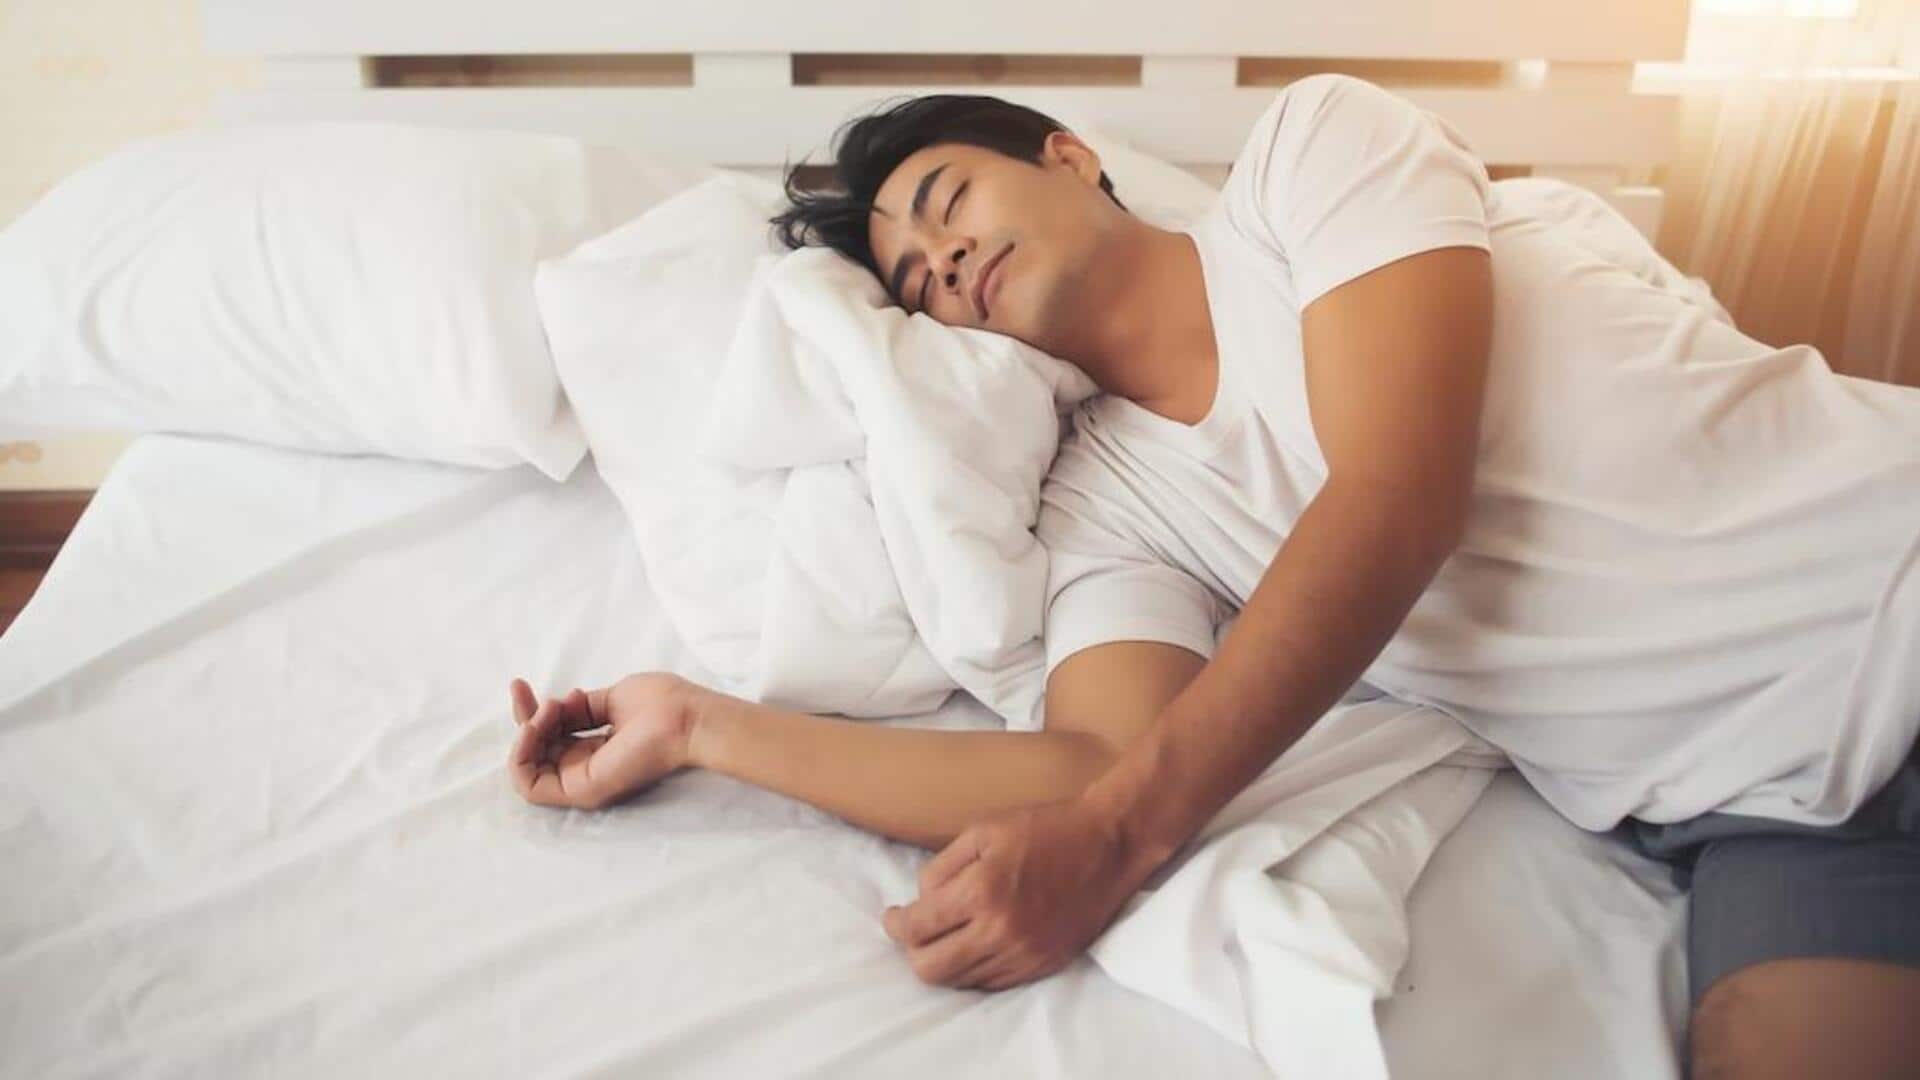 How humans transitioned to sleeping on beds